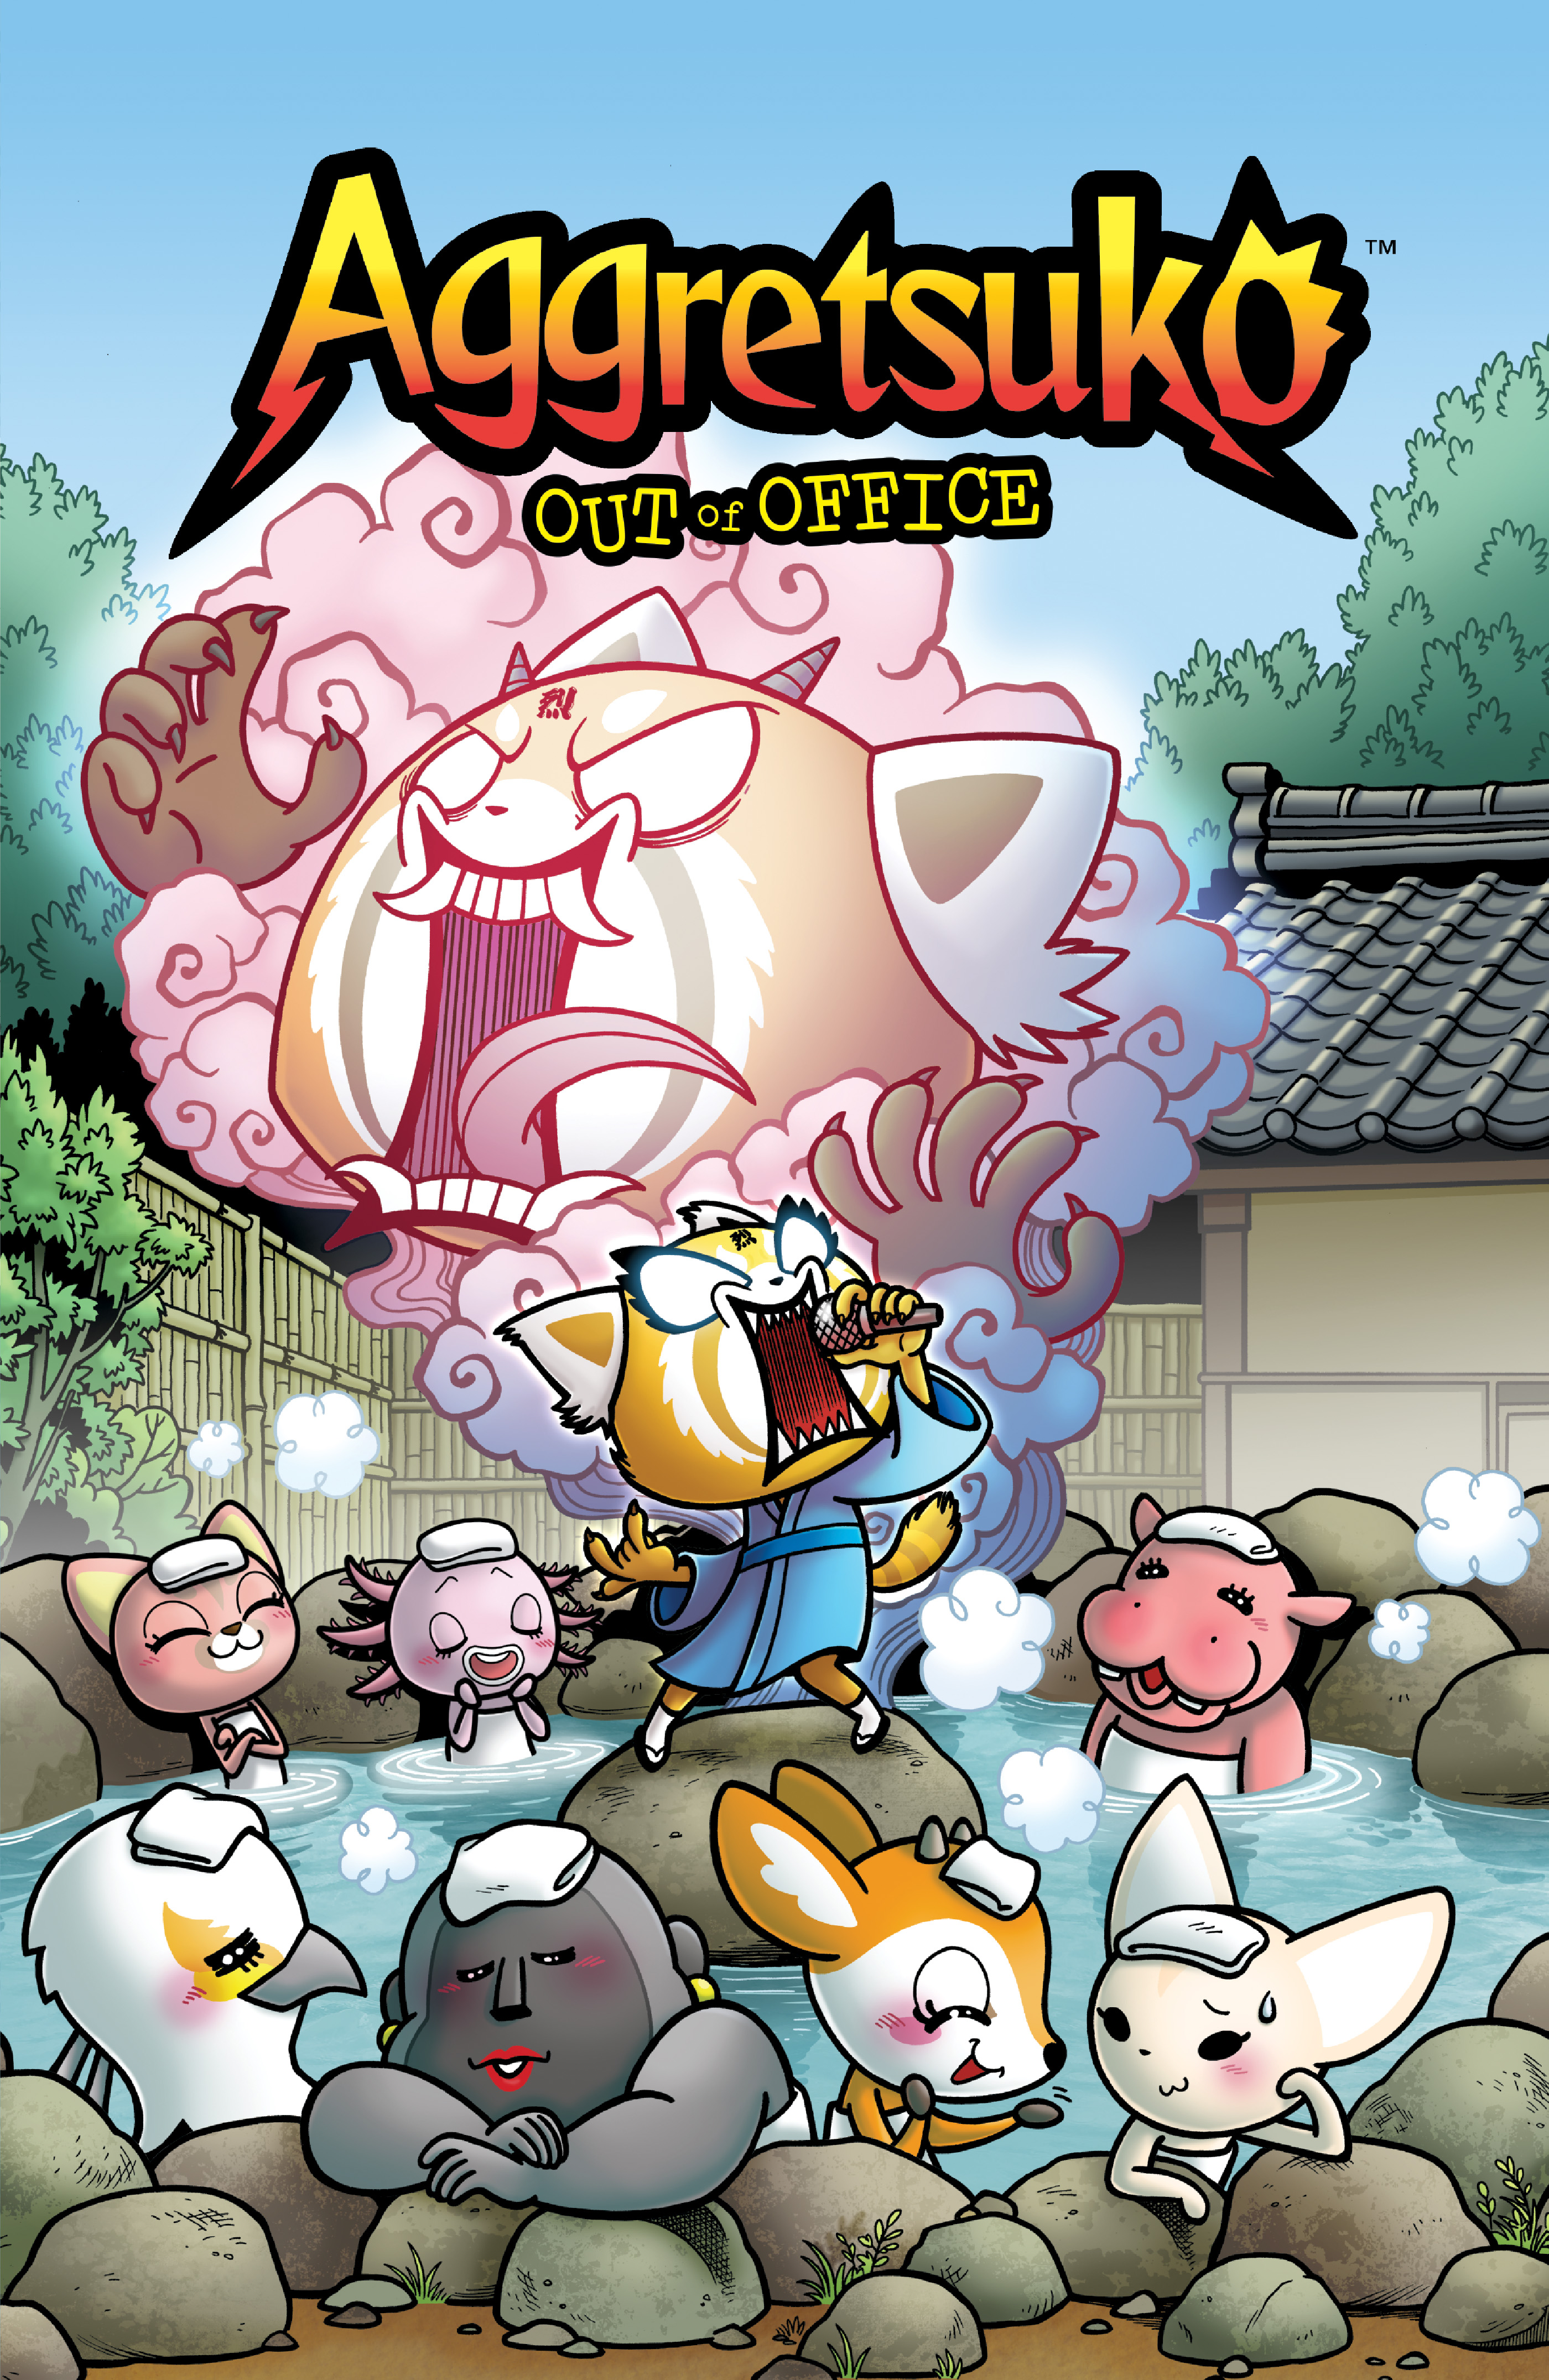 Aggretsuko Graphic Novel Volume 1 Out of Office